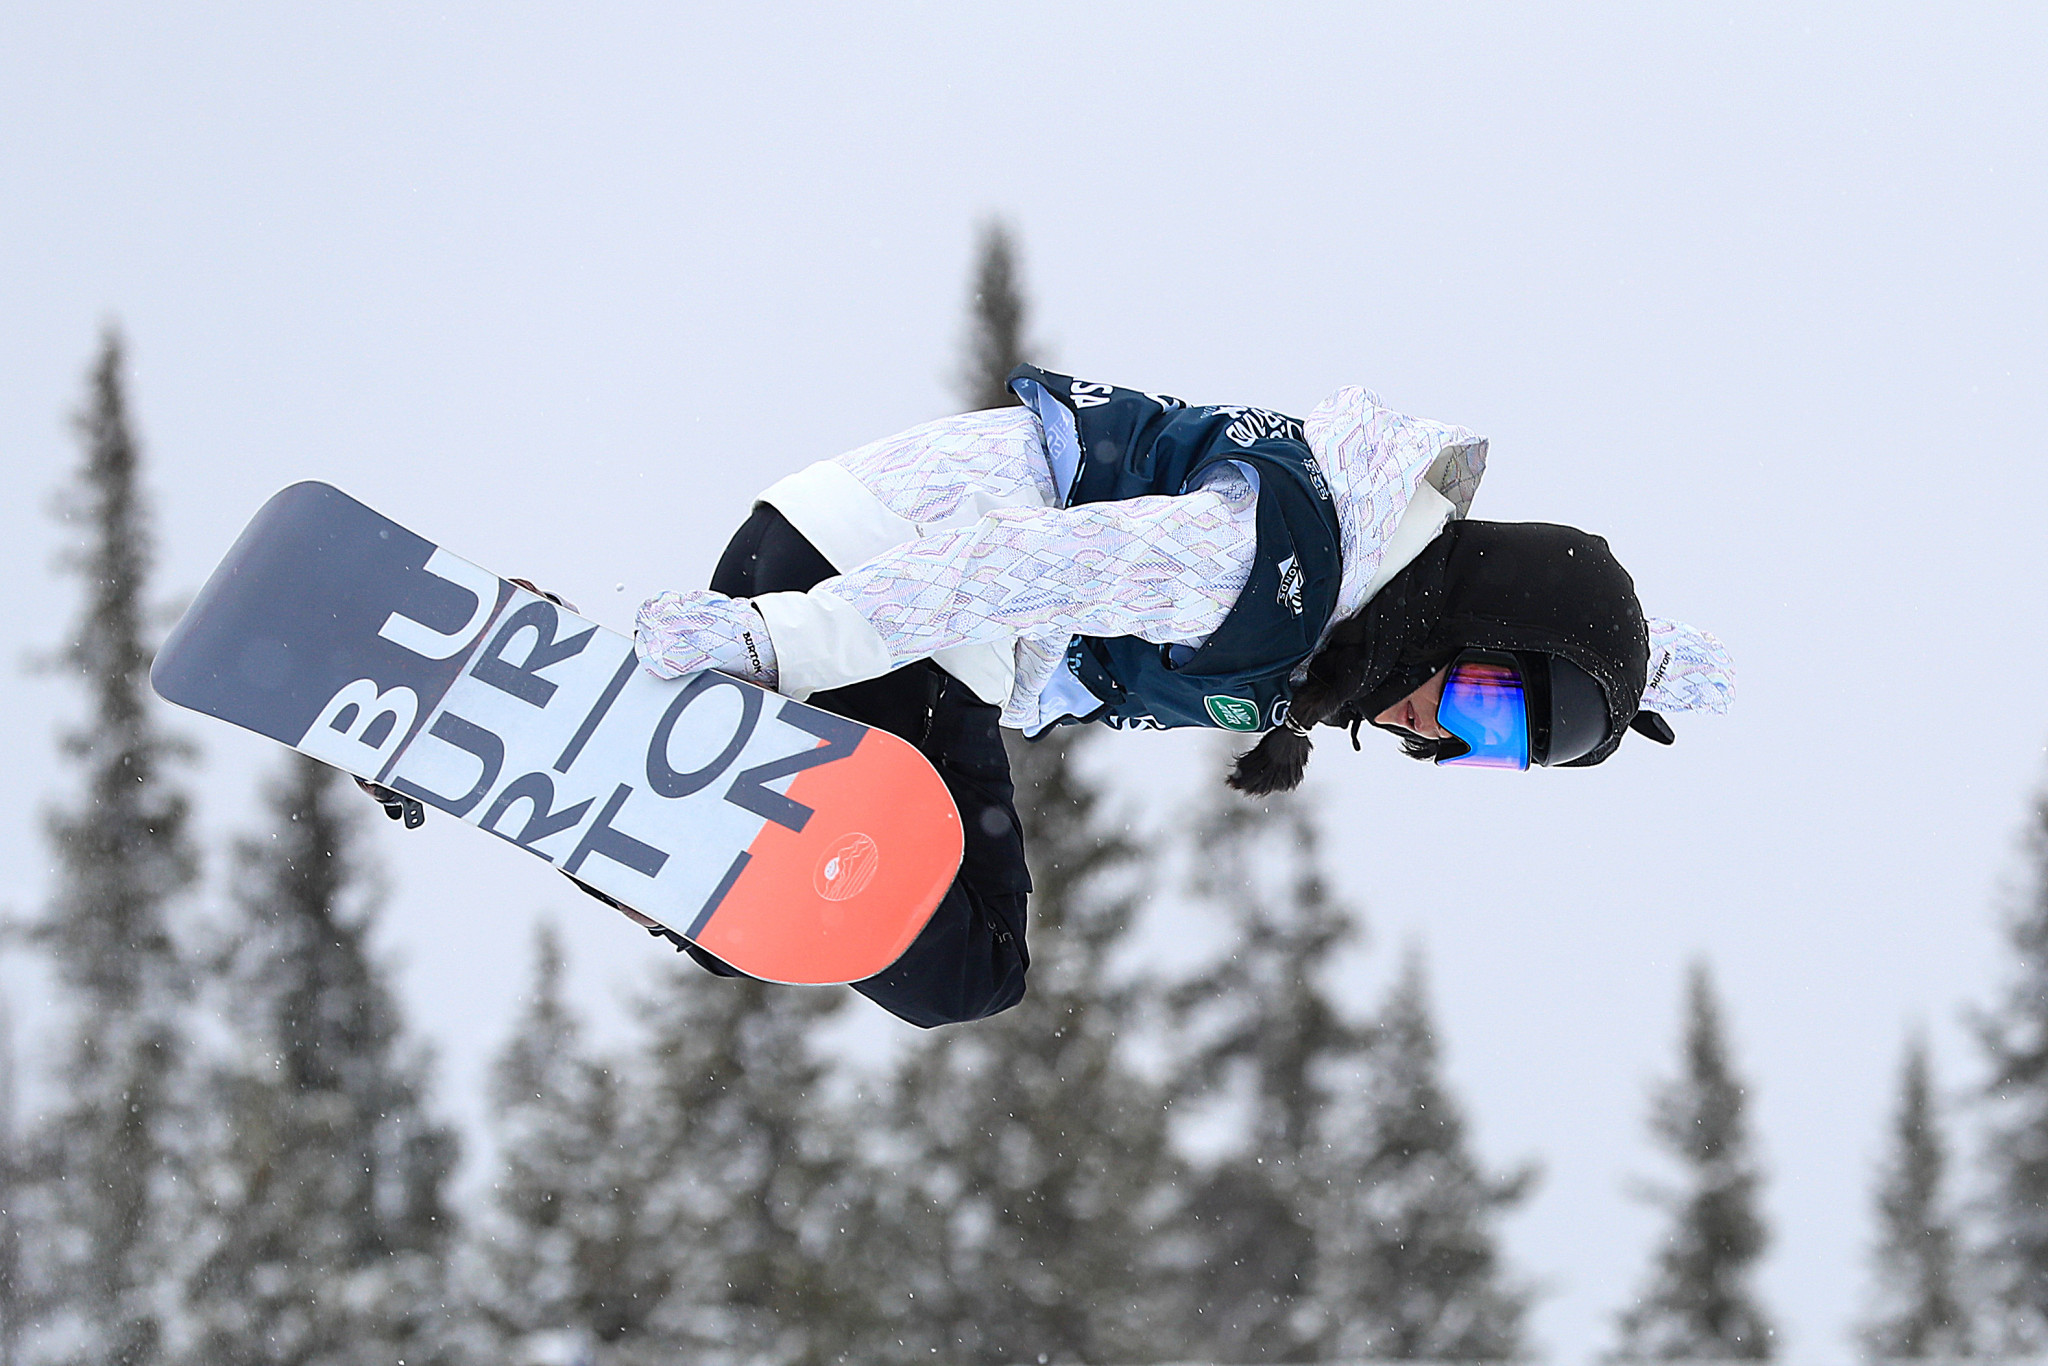 China will aim to continue their strong record in the FIS Snowboard World Cup halfpipe event at Secret Garden ©Getty Images